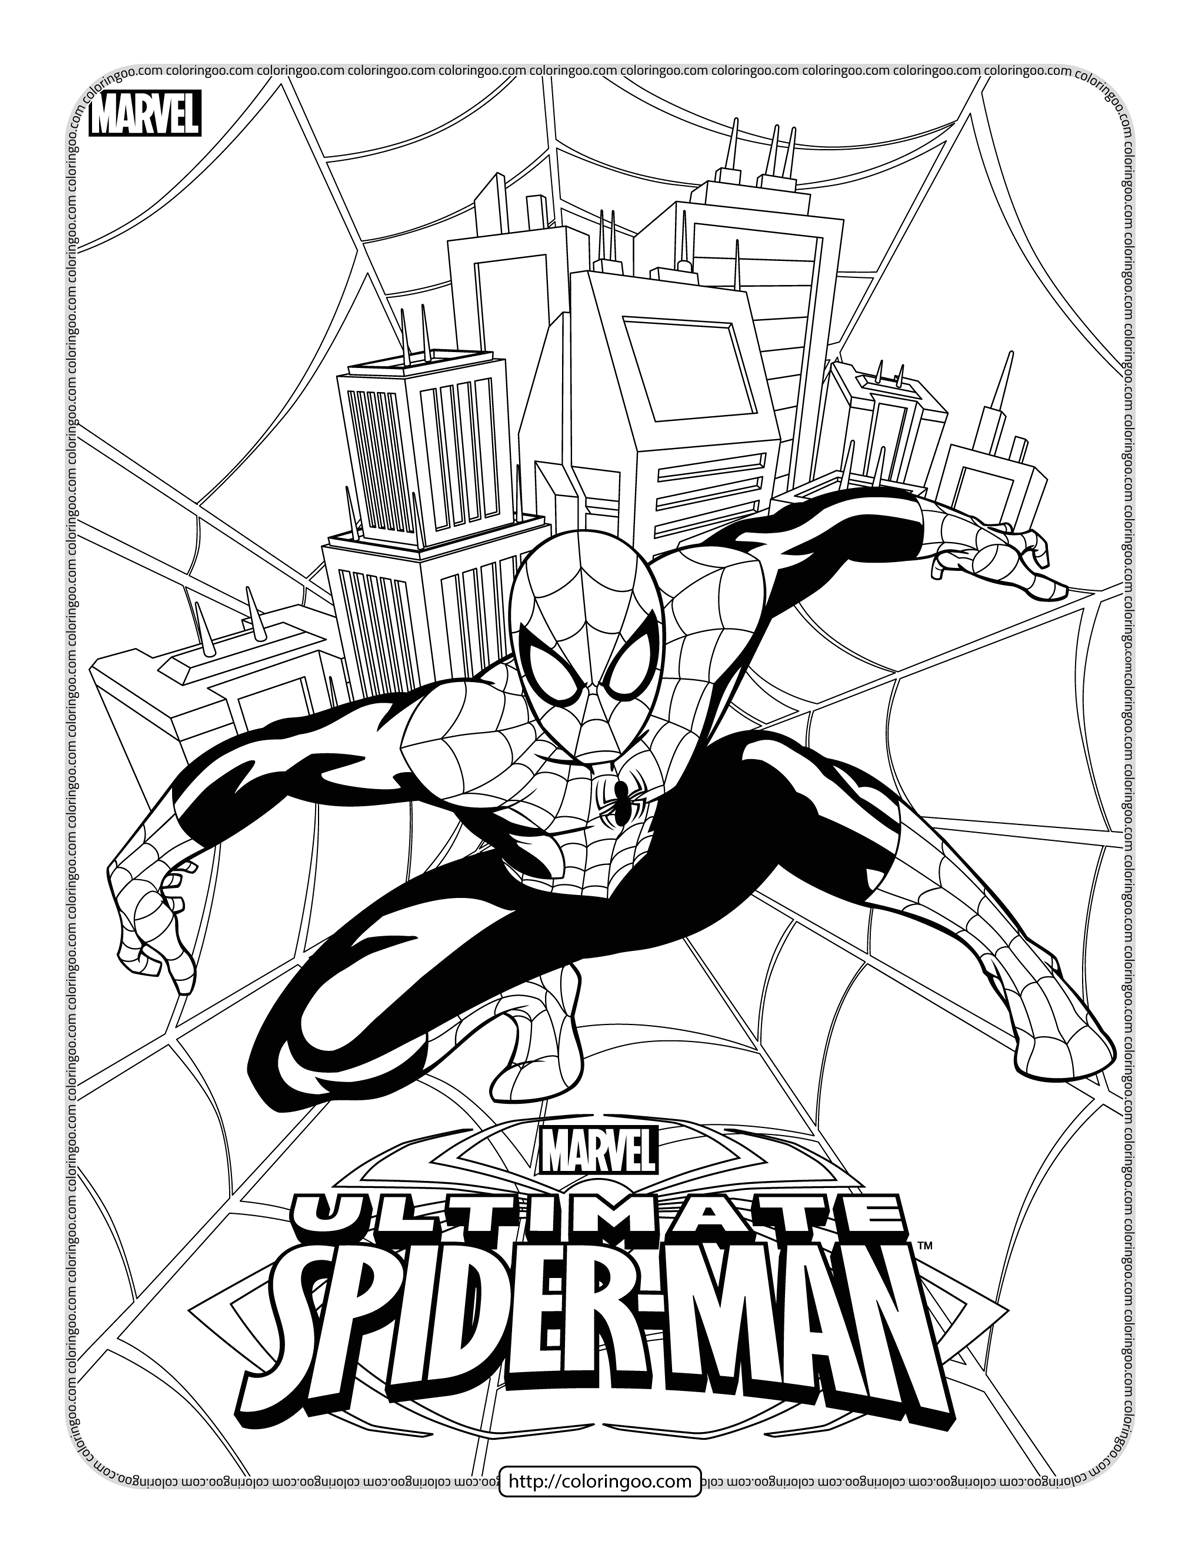 Marvel Ultimate Spider-Man Coloring Pages